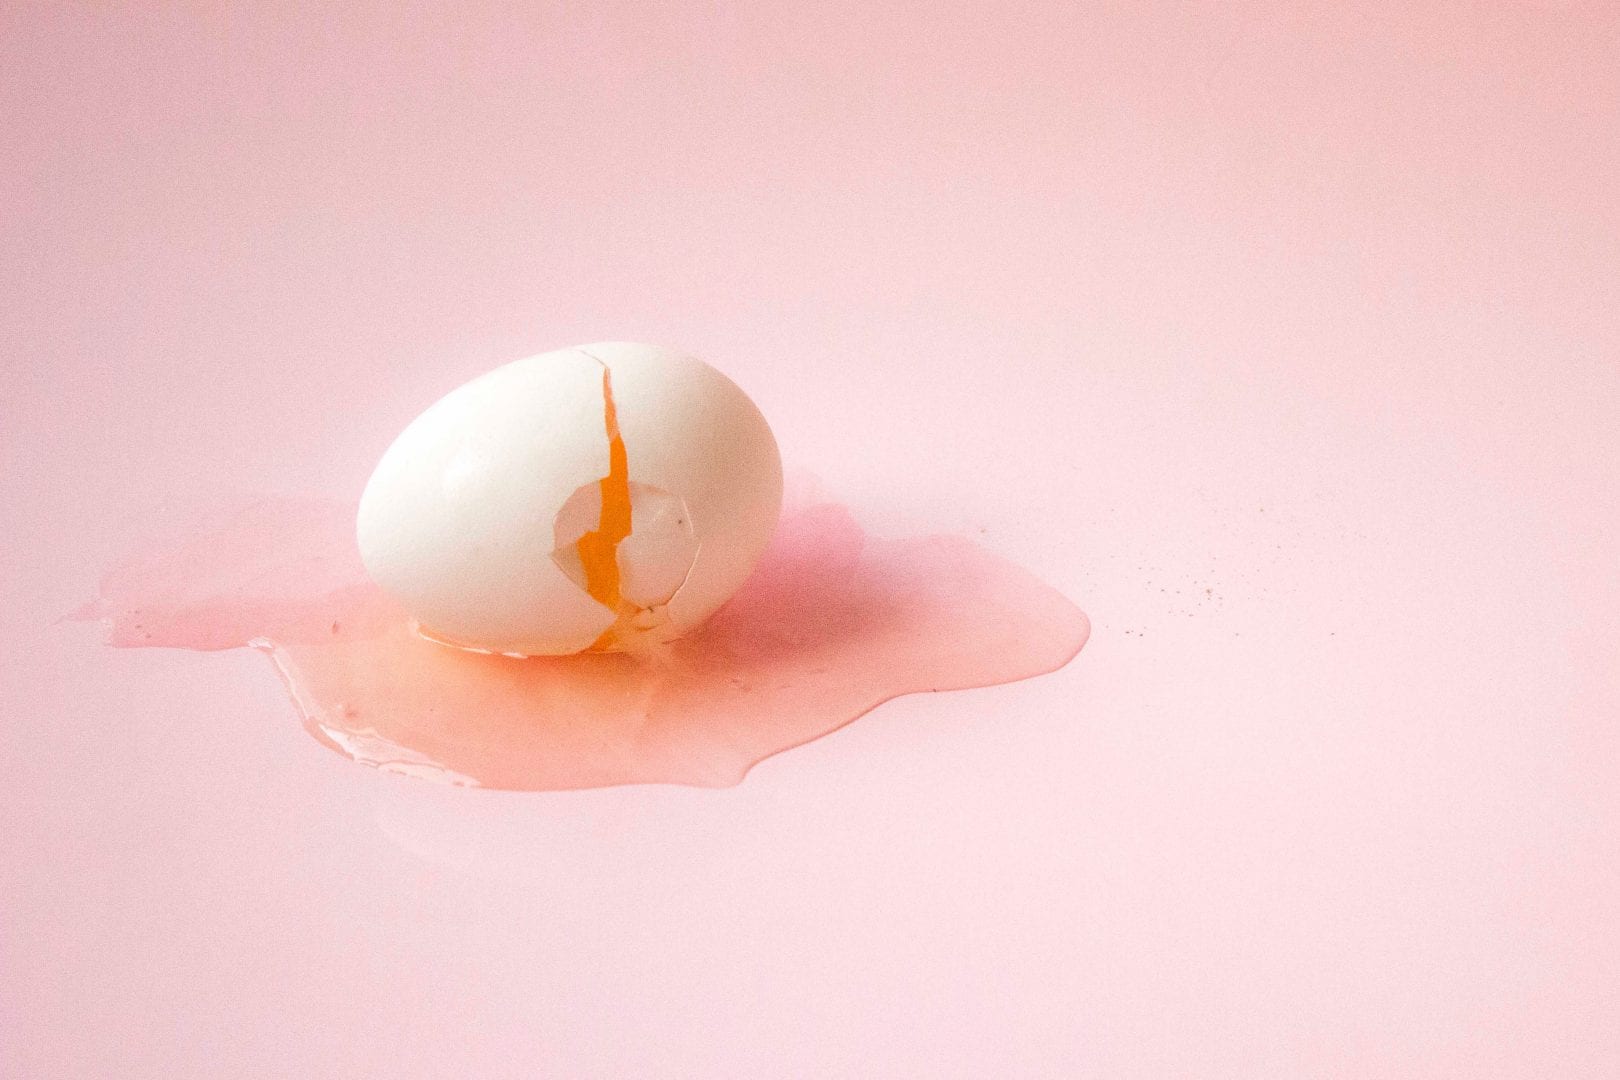 a cracked egg on a pale pink background